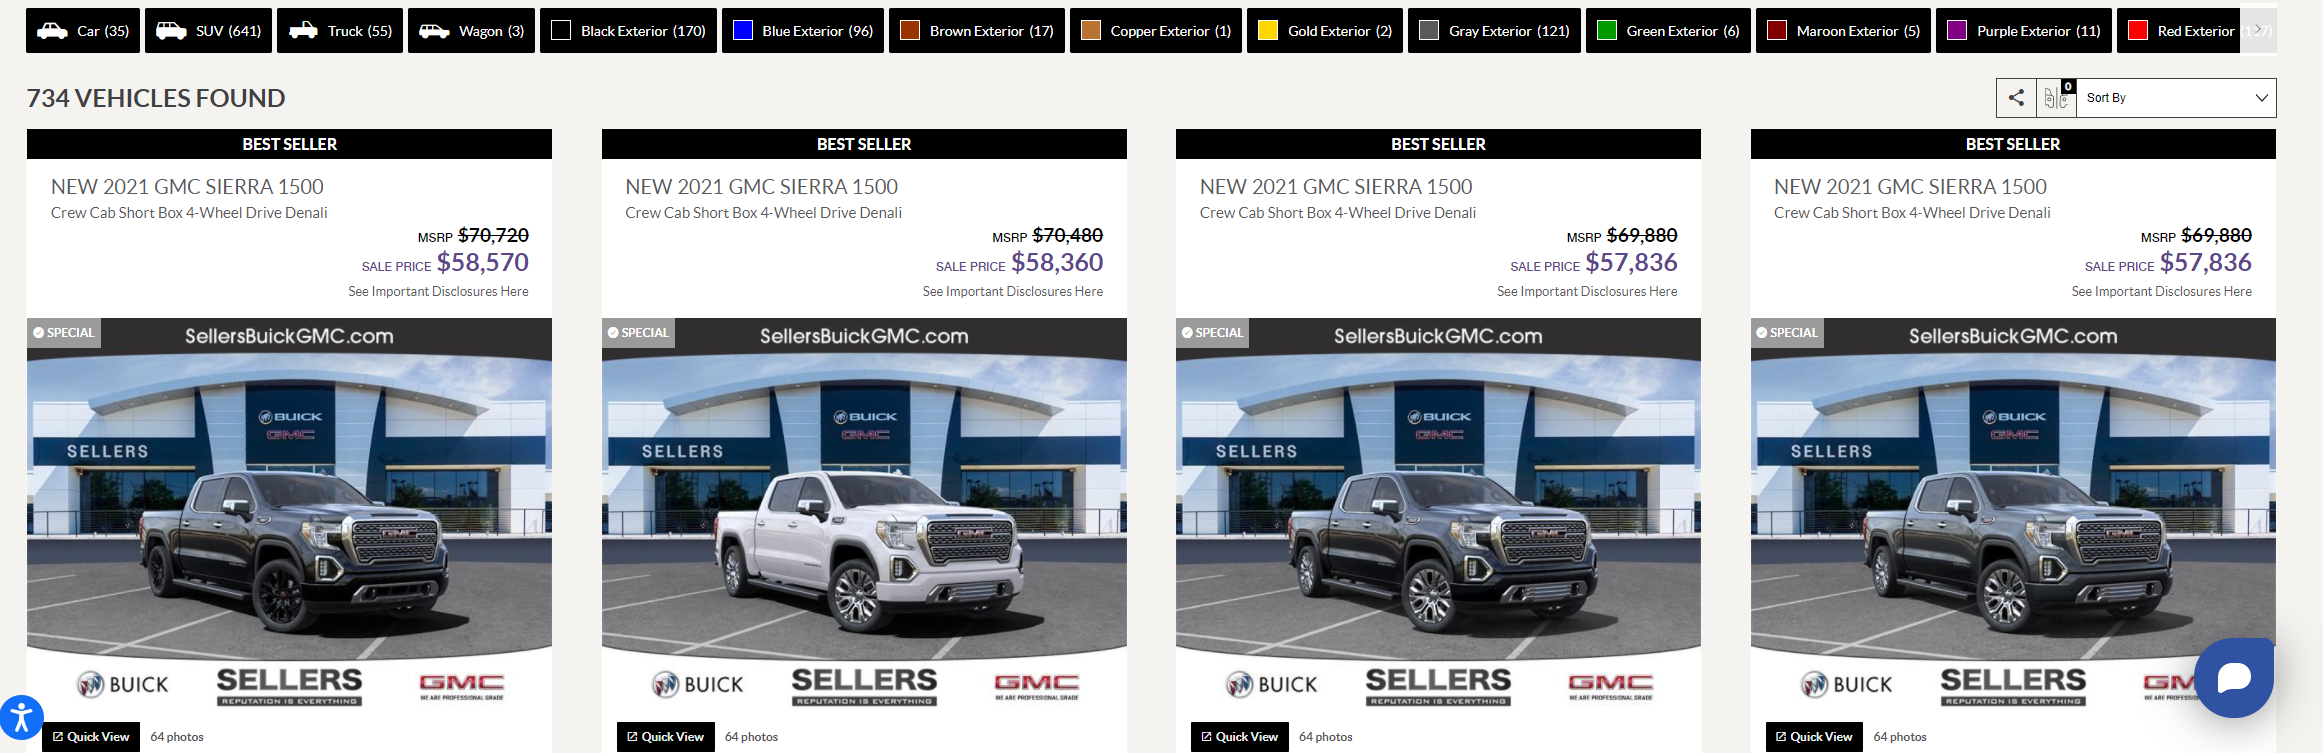 Dealers: Leverage Your Content to Keep Your Shoppers